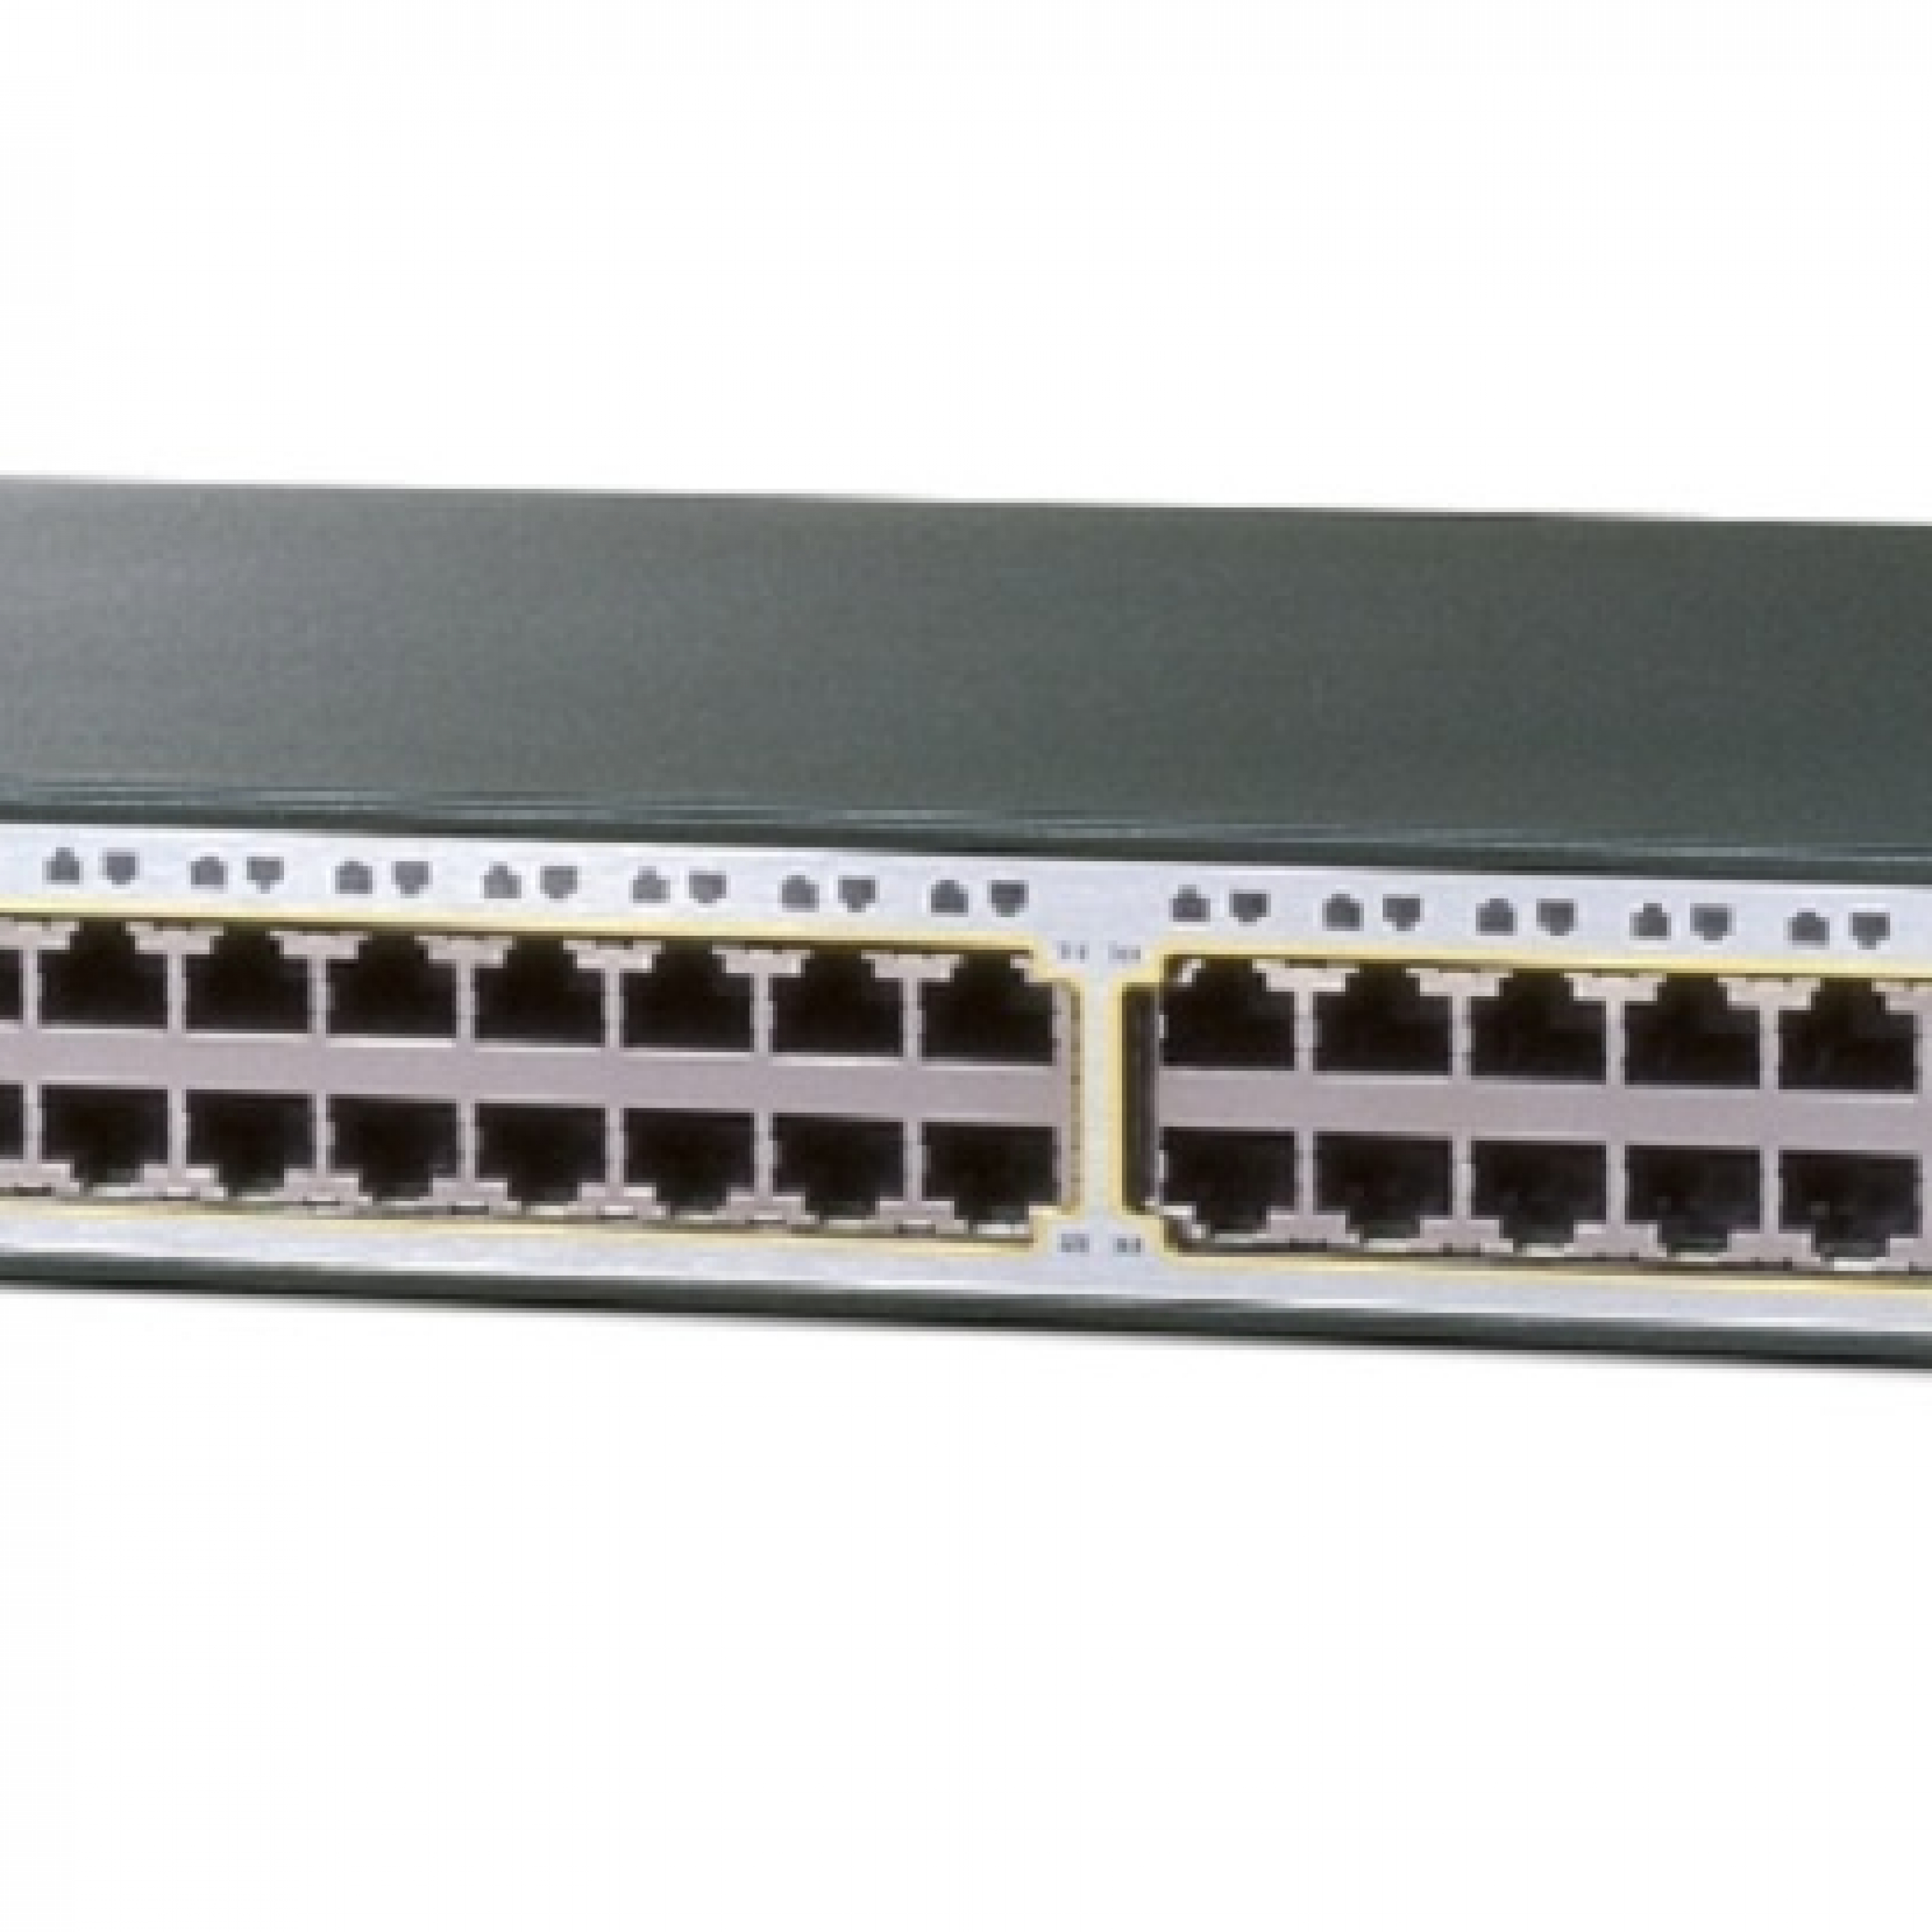 Cisco Catalyst 3750G-48TS-48 Ethernet 10/100/1000 ports and four SFP uplinks